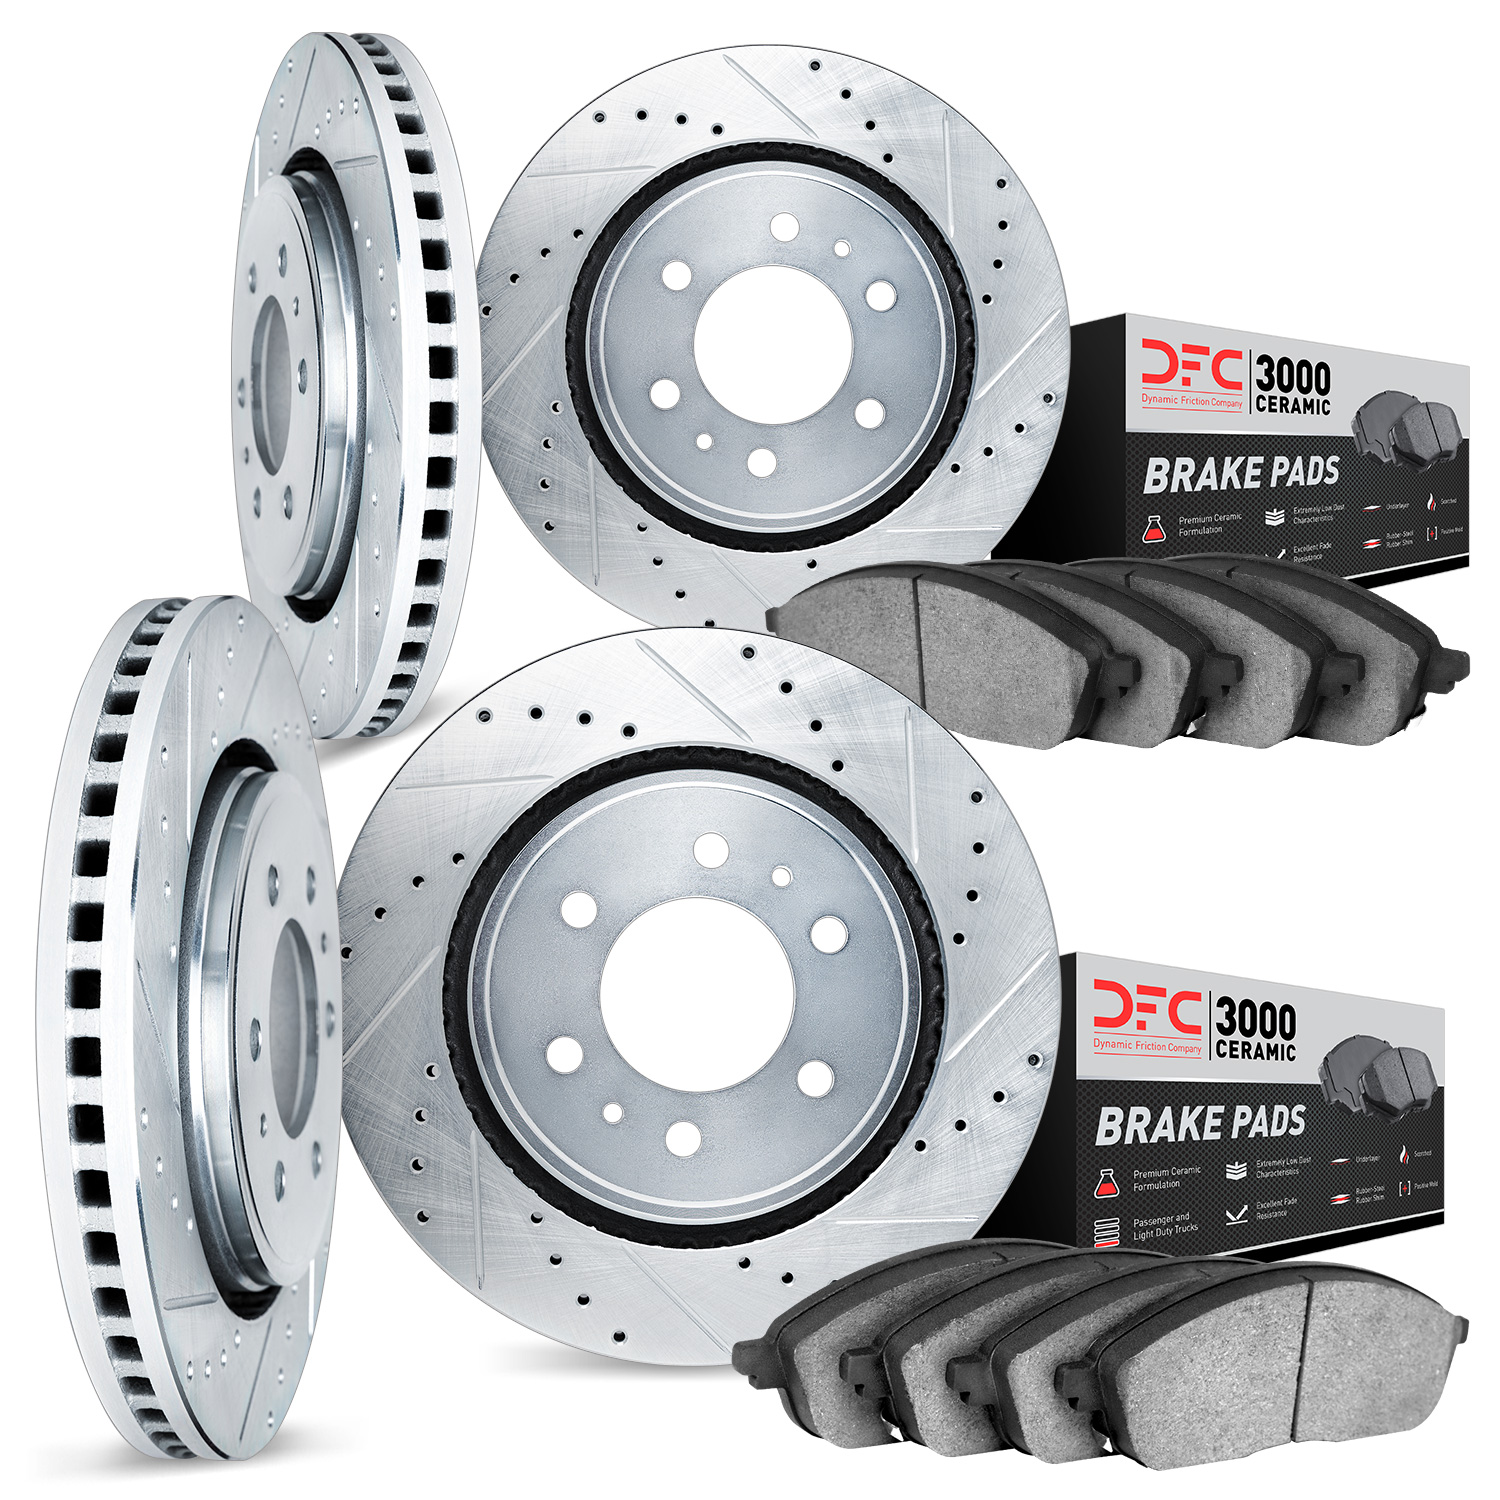 7304-54123 Drilled/Slotted Brake Rotor with 3000-Series Ceramic Brake Pads Kit [Silver], 2018-2021 Ford/Lincoln/Mercury/Mazda, P